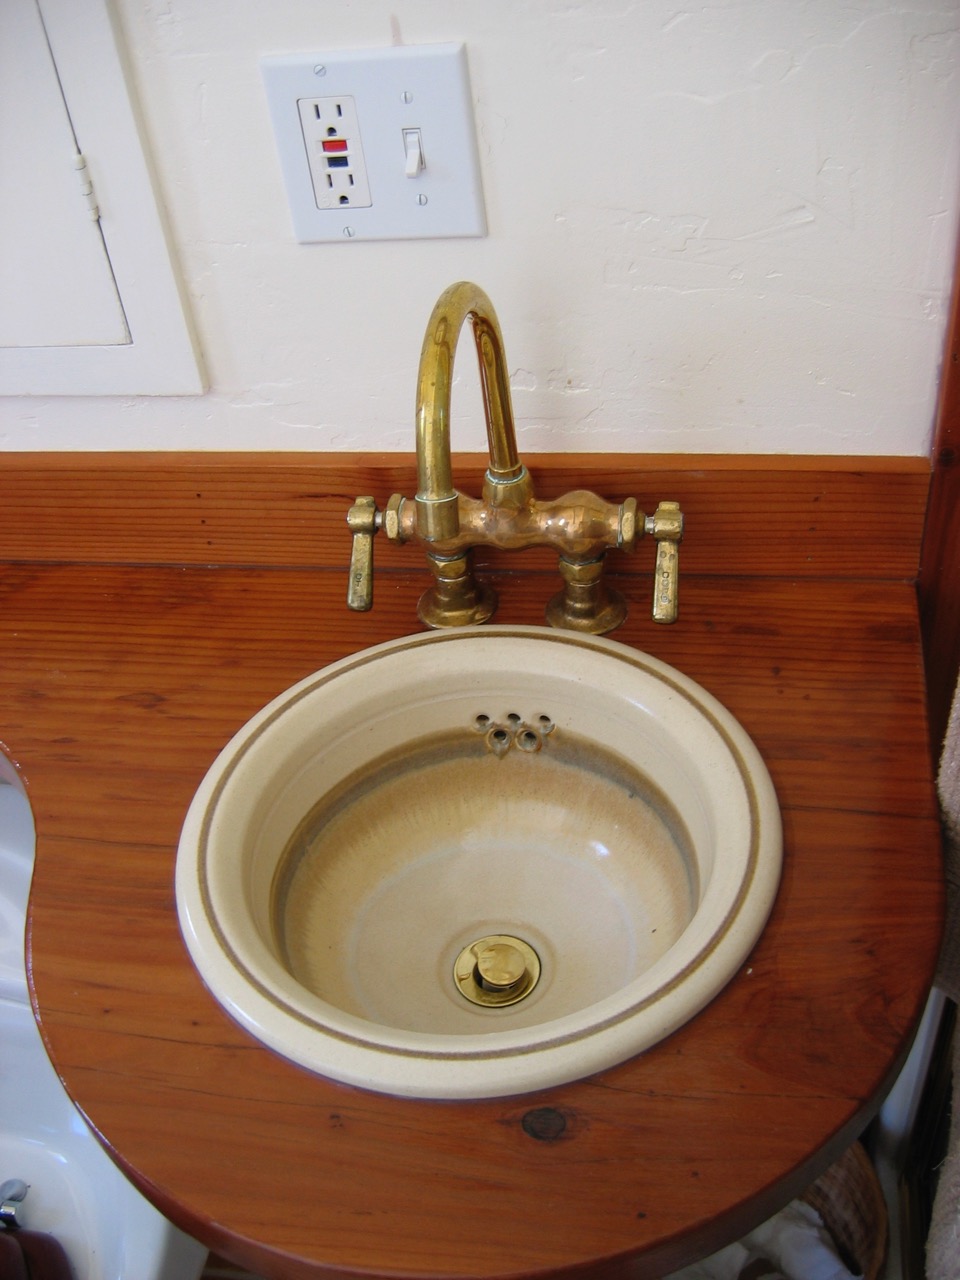 Sink and faucet detail